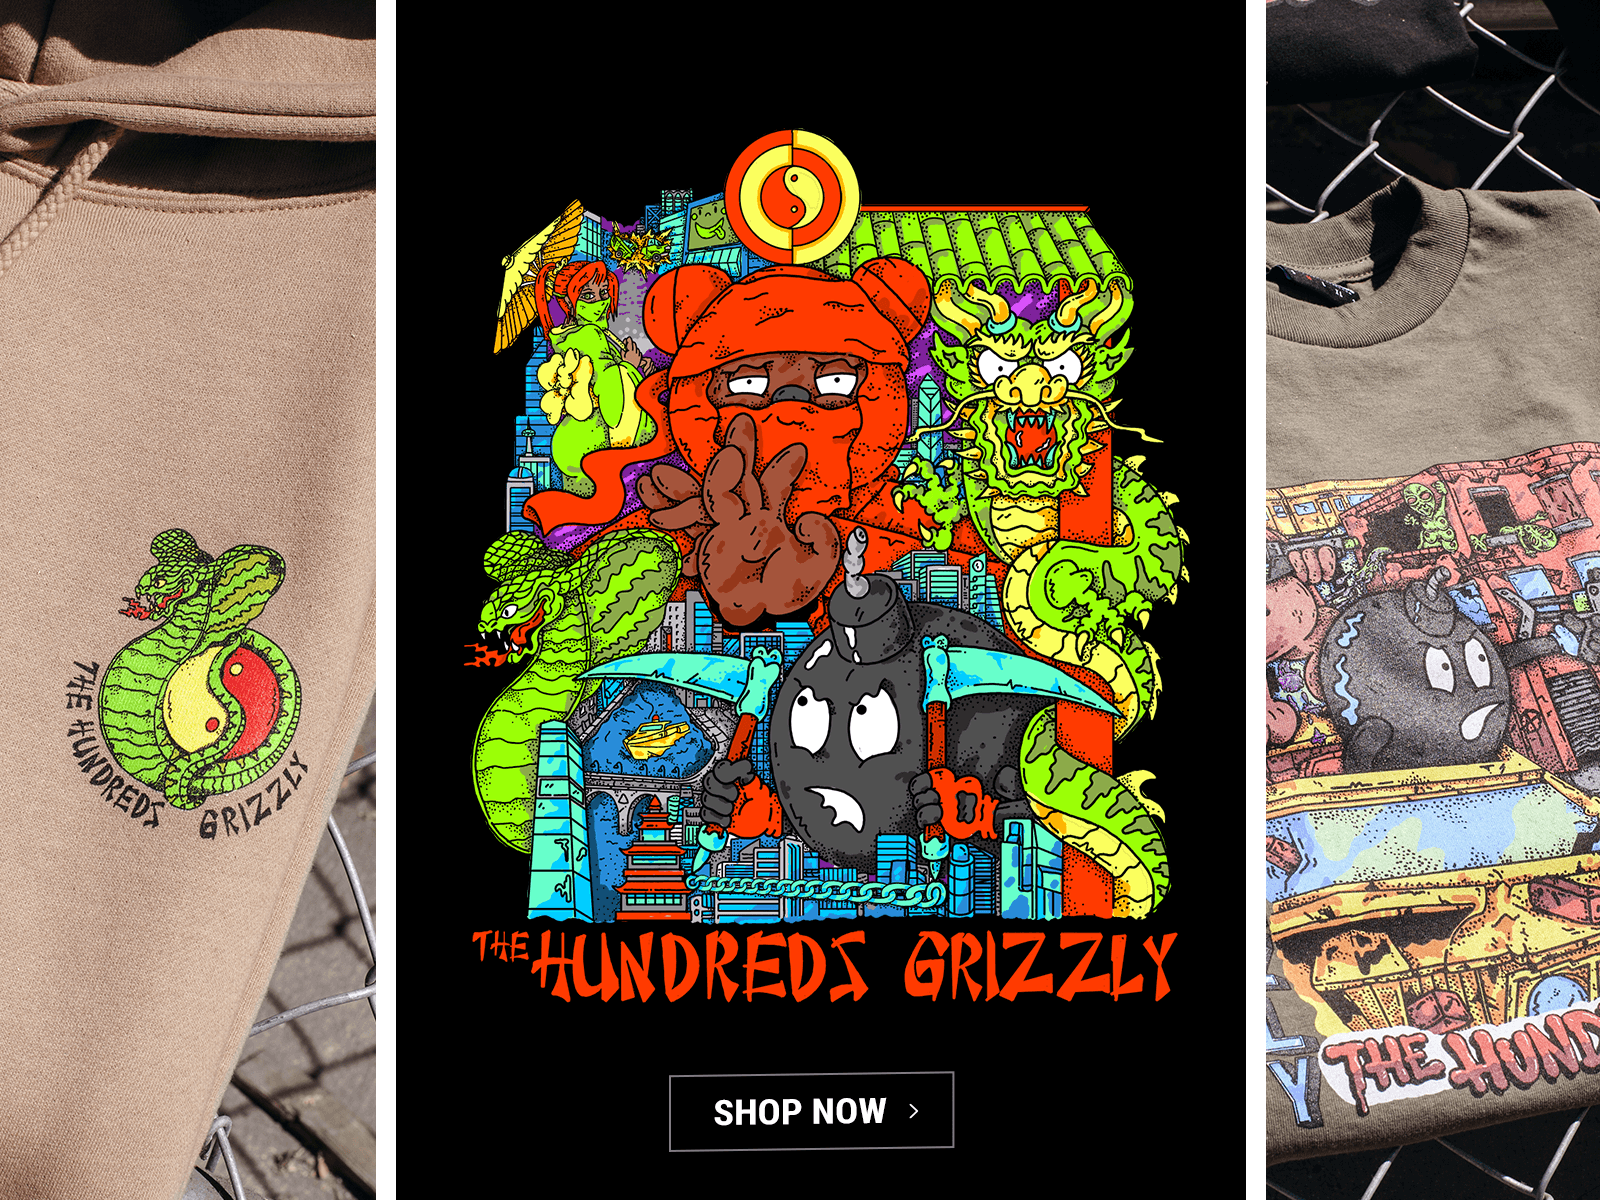 The Hundreds Grizzly Logo - The Hundreds: AVAILABLE NOW - KC Ortiz for The Hundreds X Grizzly